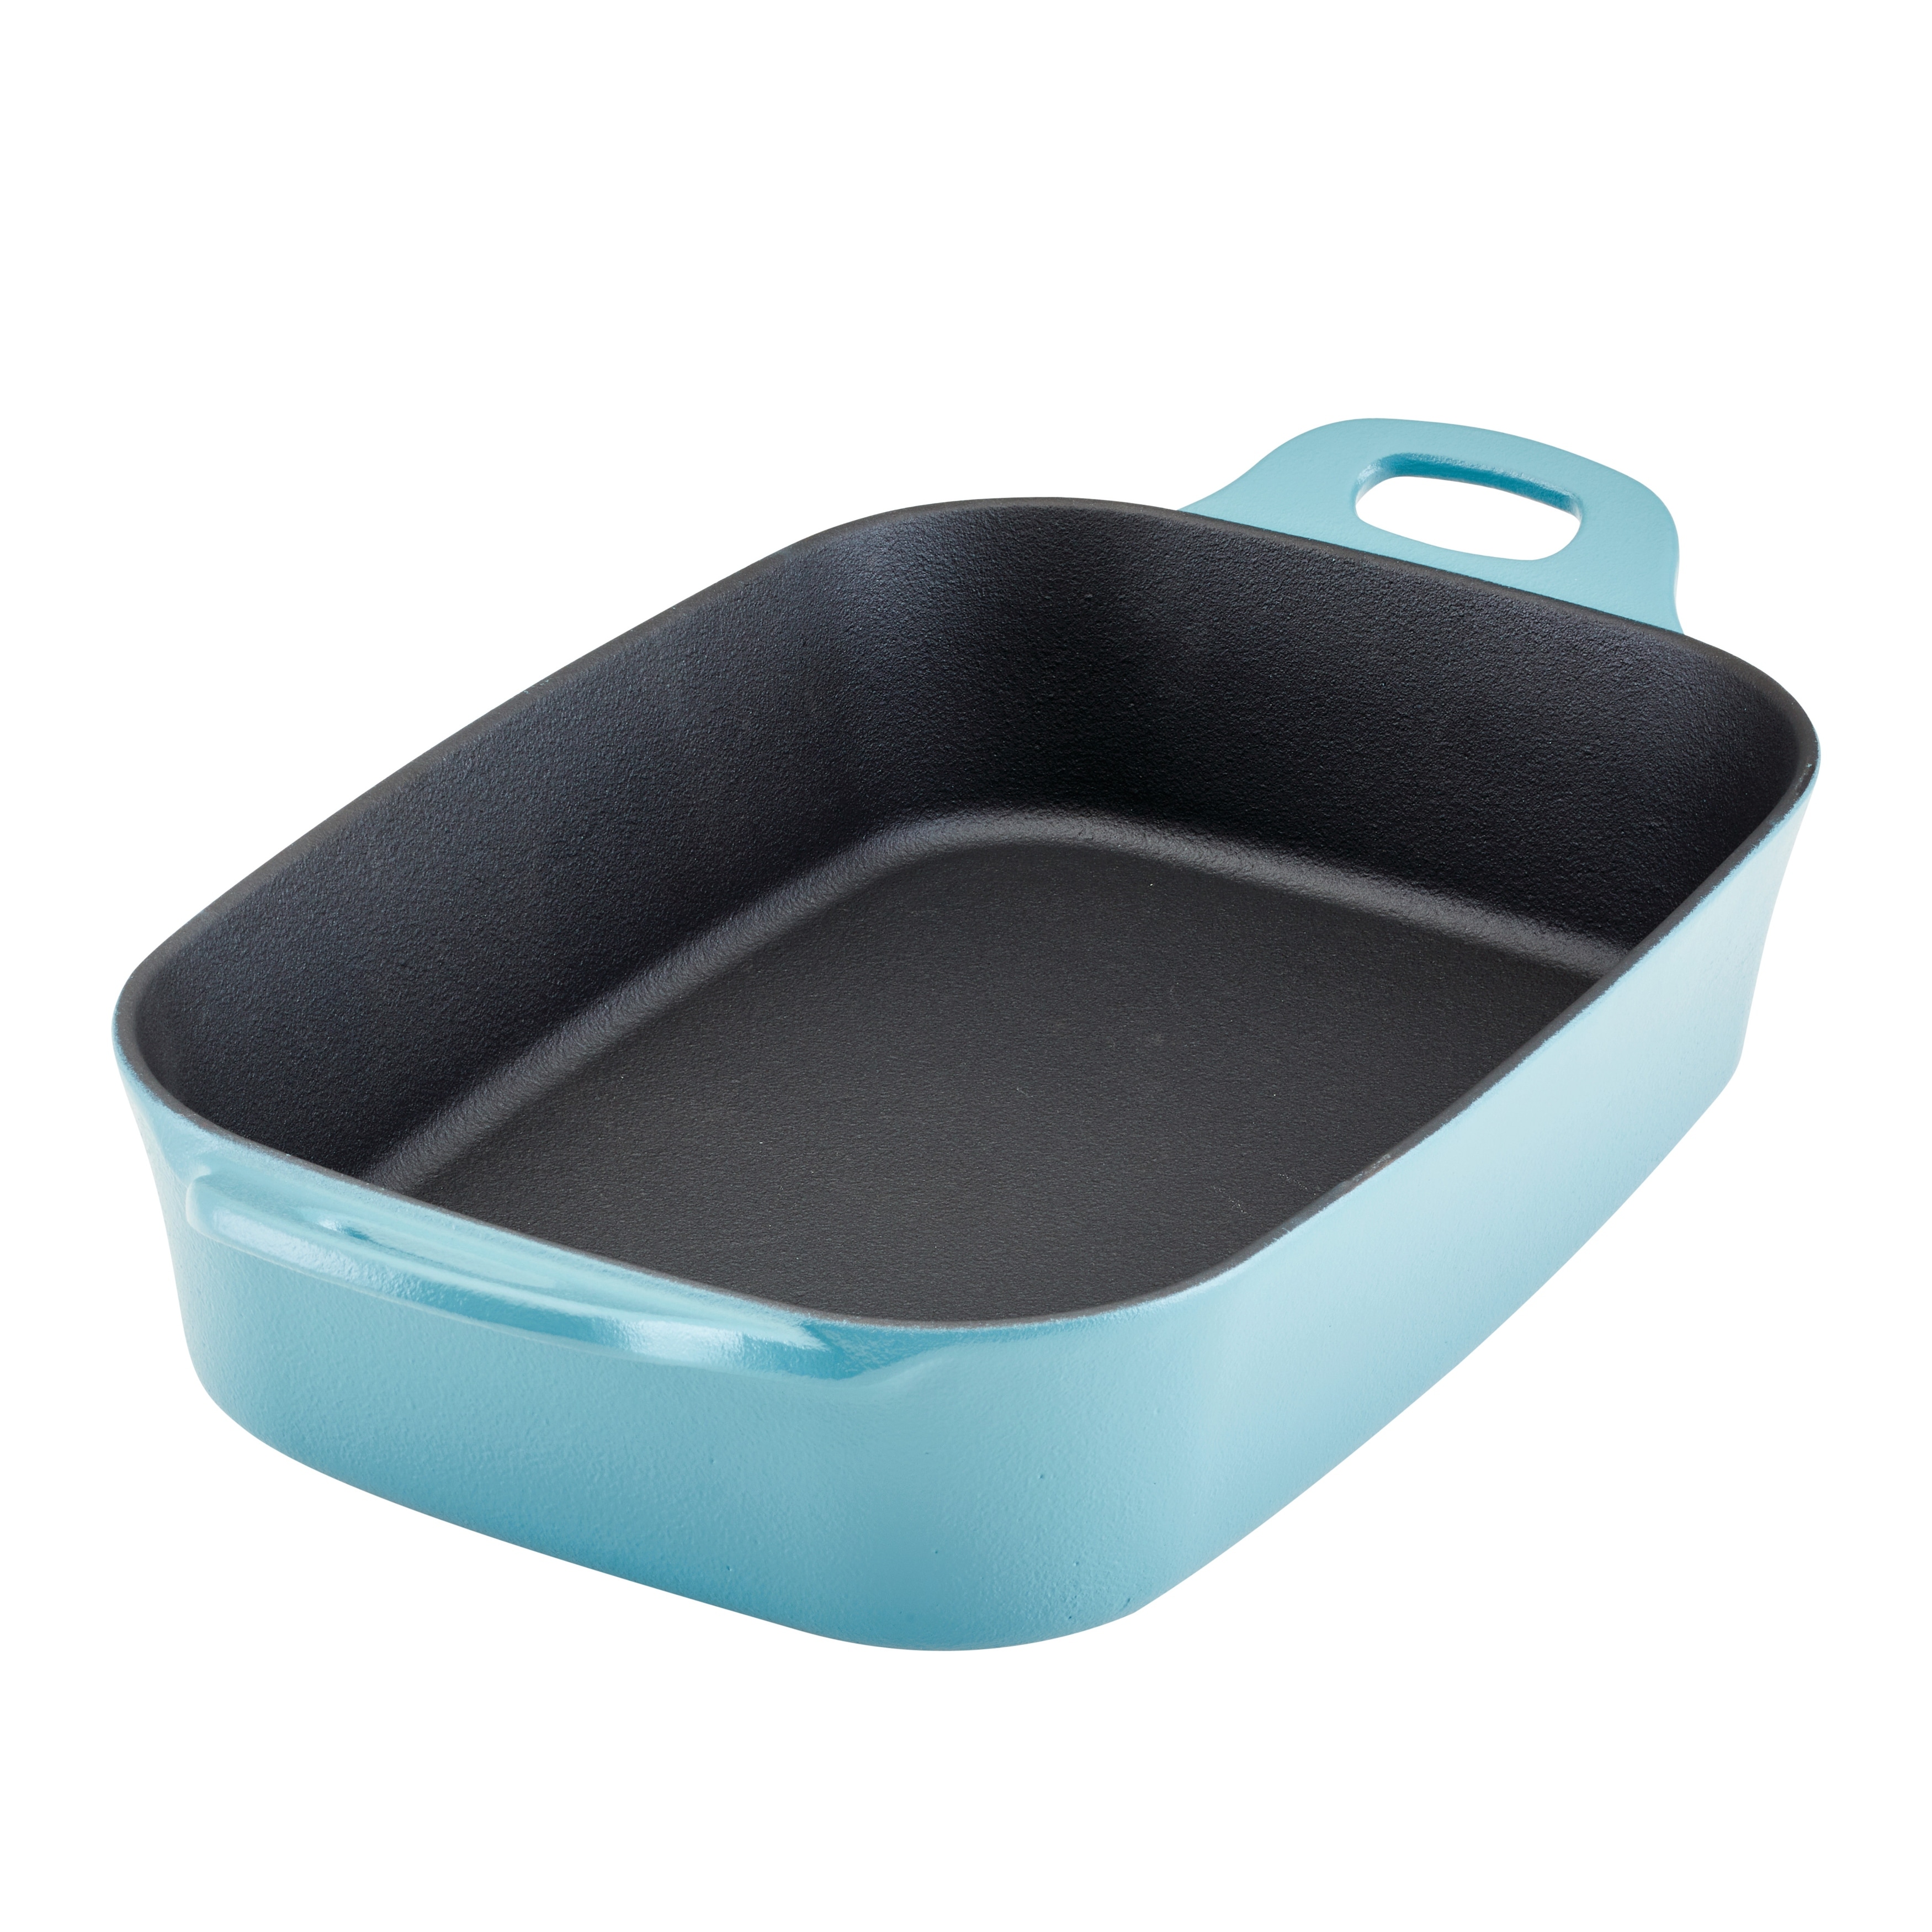 https://ak1.ostkcdn.com/images/products/is/images/direct/ec651fe4523dcaf1a97069d71698d688dfa7bdd8/Rachael-Ray-NITRO-Cast-Iron-Roasting-Pan%2C-9-Inch-x-13-Inch%2C-Agave-Blue.jpg